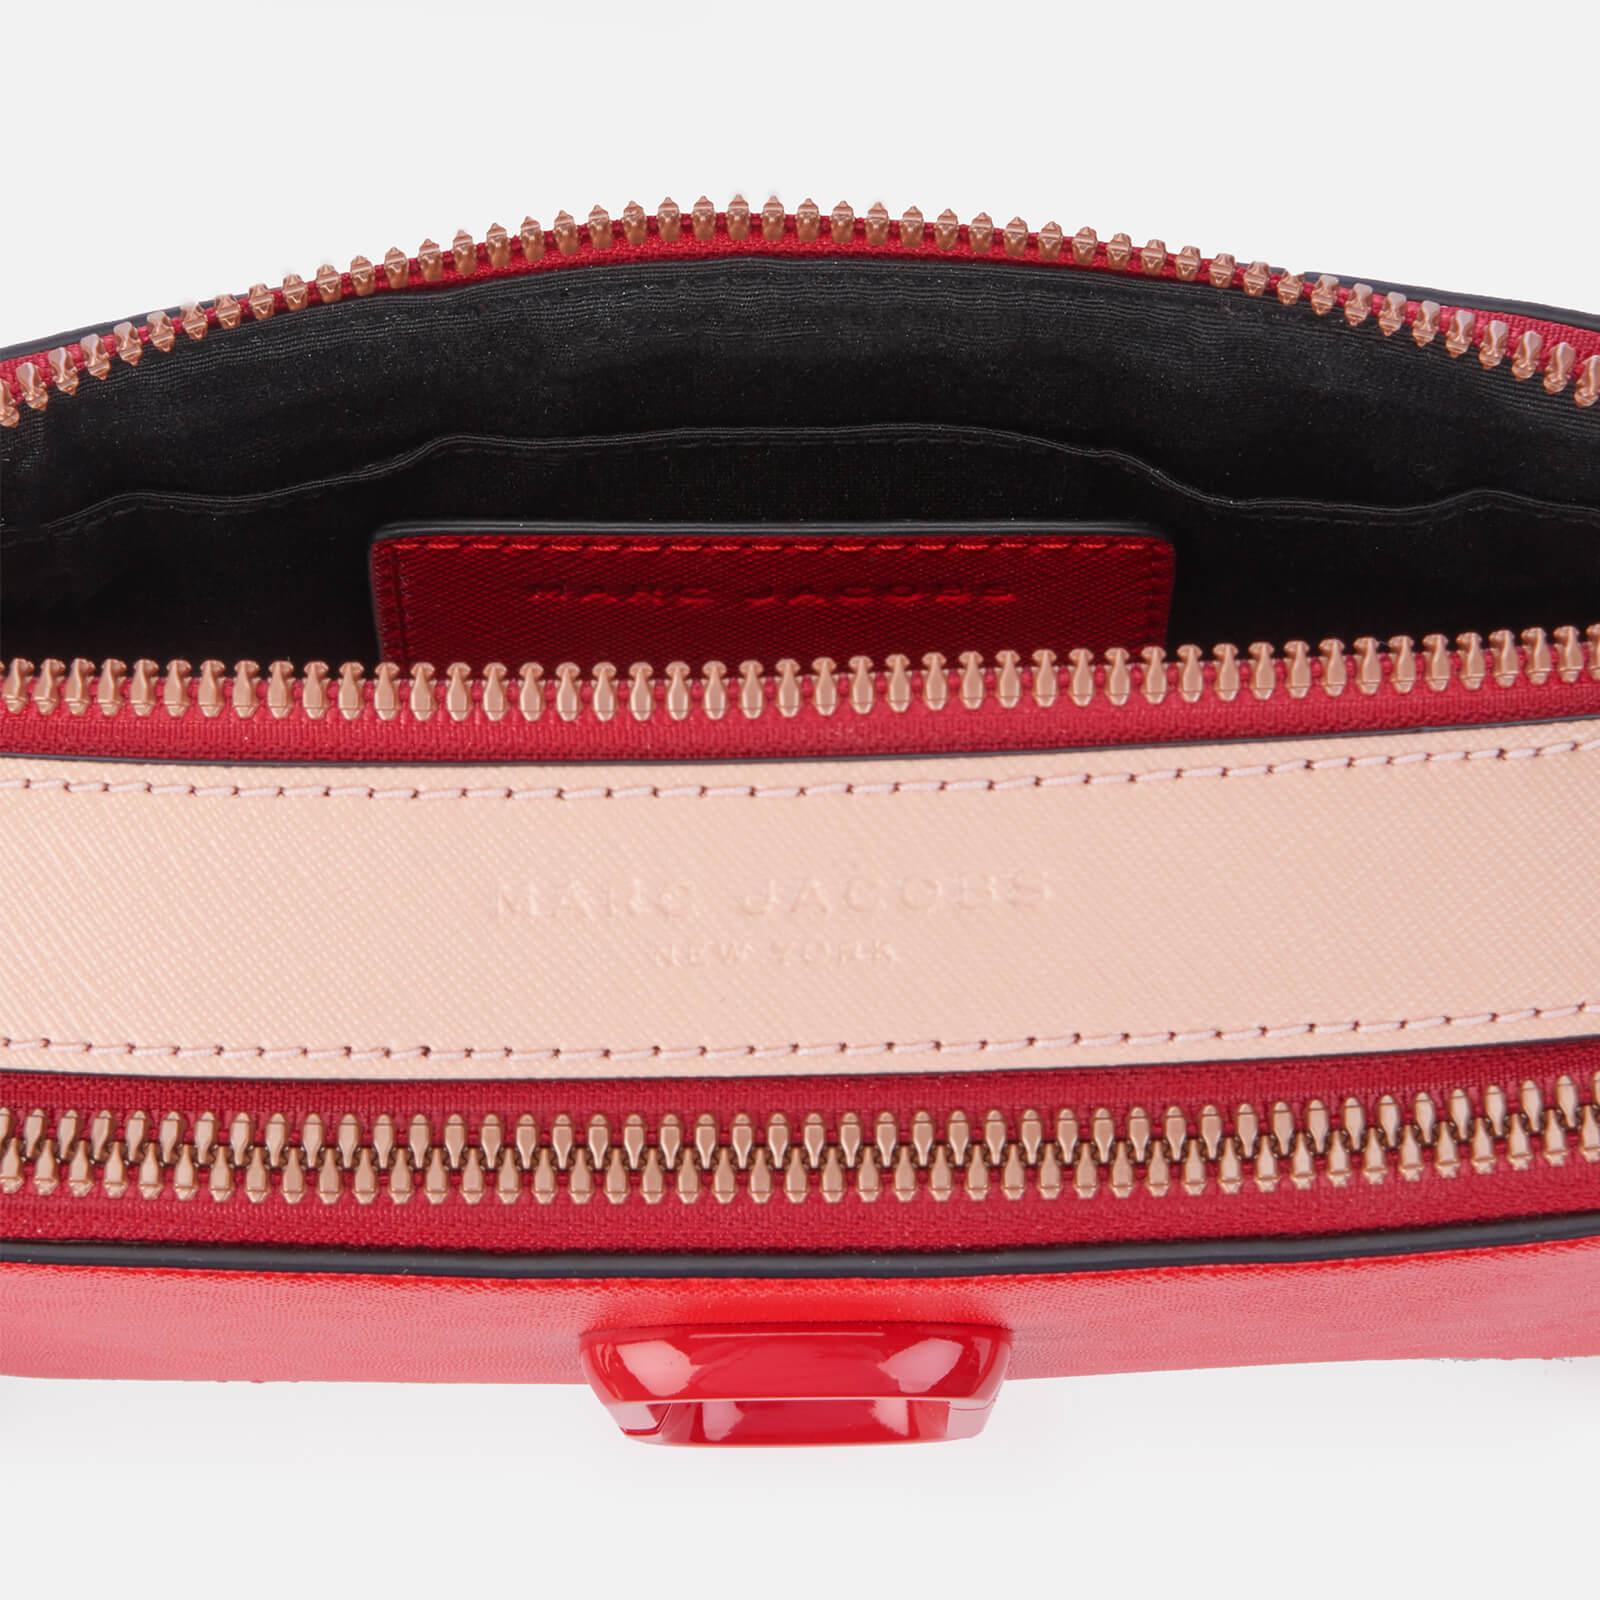 Marc Jacobs Snapshot Bag In Poppy Red Leather With Polyurethane Coating in  Pink